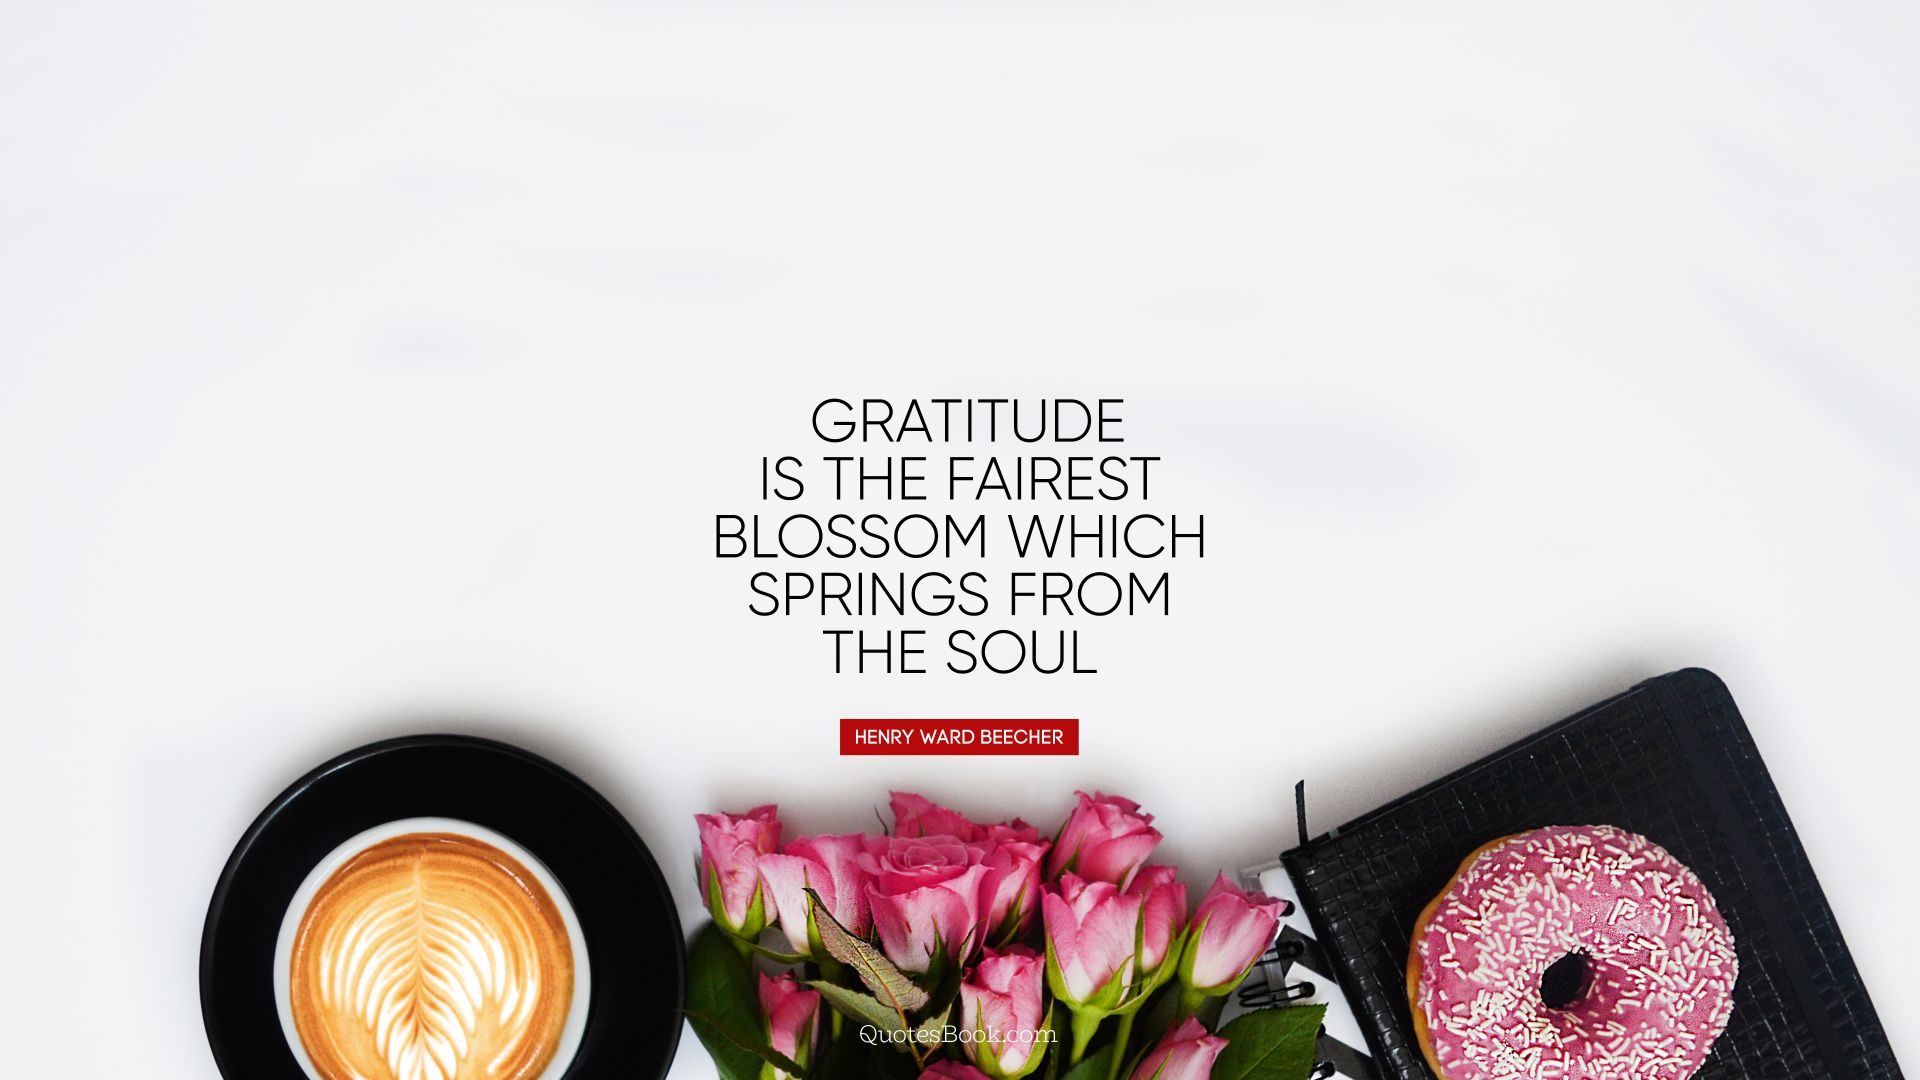 Gratitude is the fairest blossom which 
springs from the soul. - Quote by Henry Ward Beecher